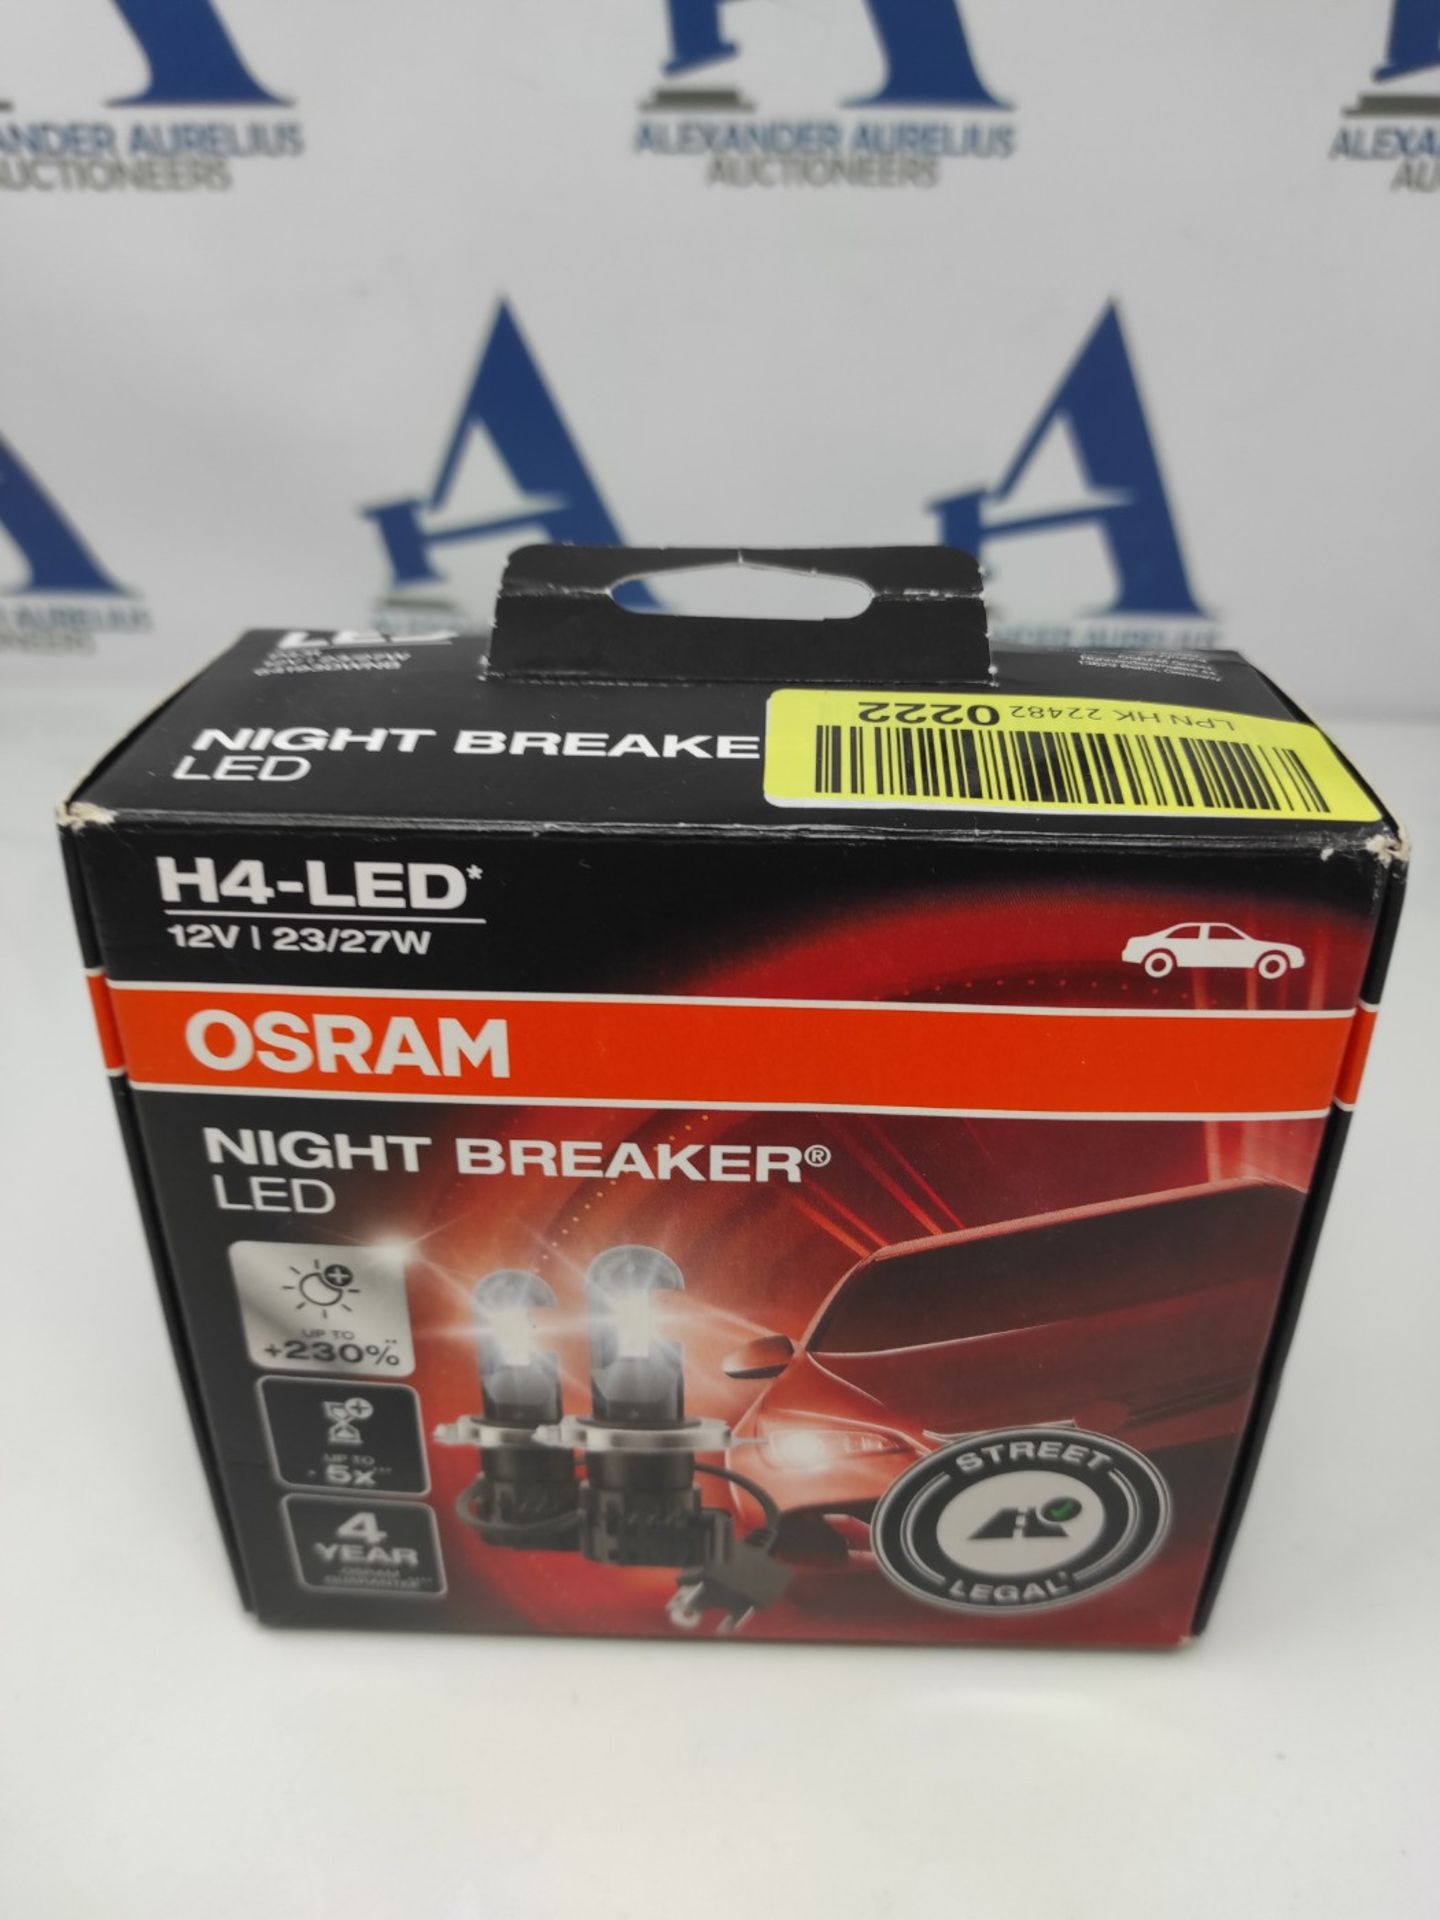 RRP £123.00 [NEW] OSRAM NIGHT BREAKER H4-LED; up to 230 percent more brightness, legal low beam an - Image 2 of 2